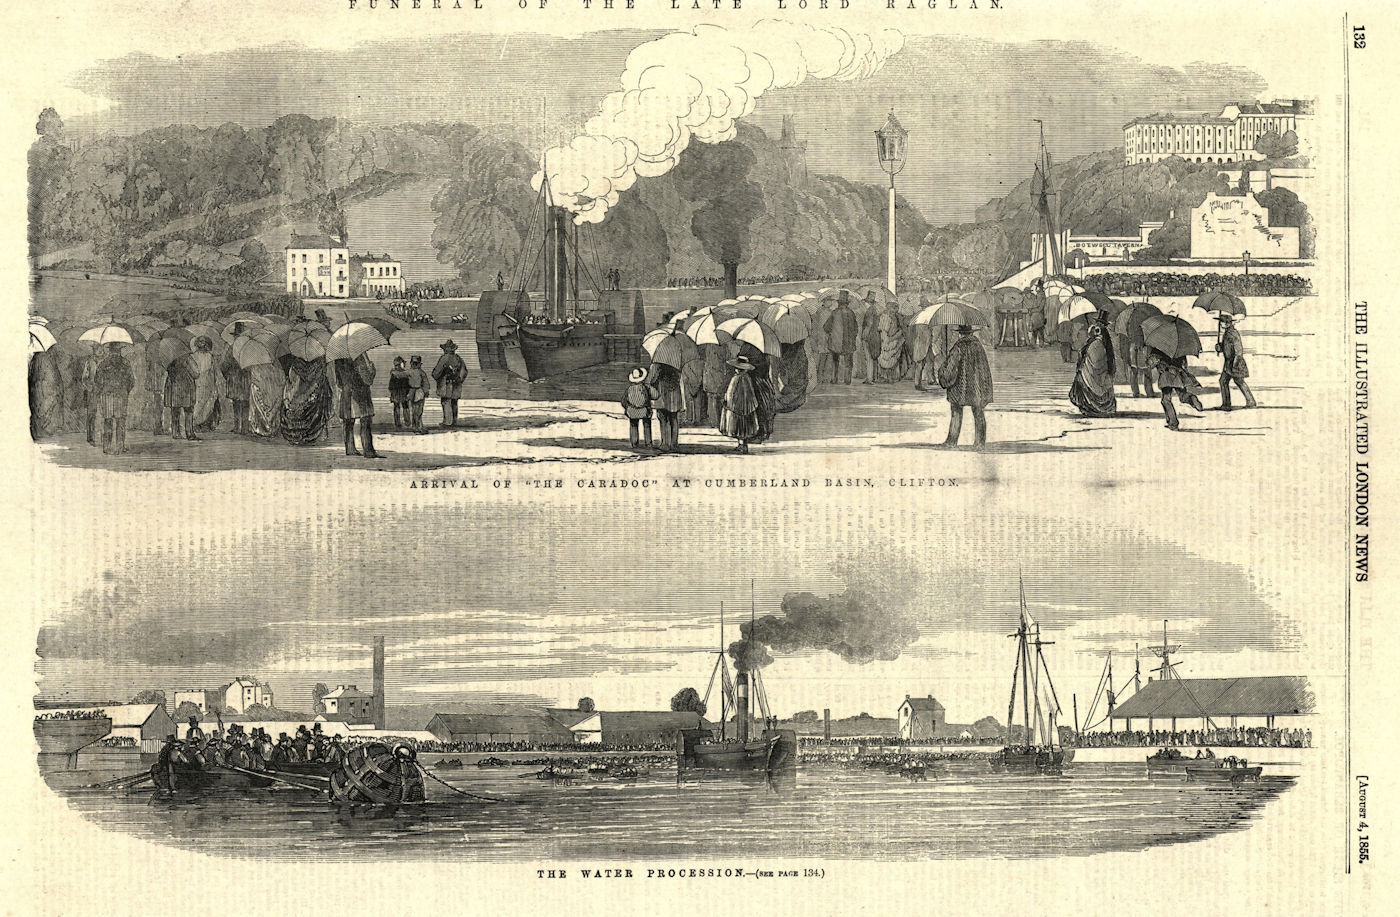 Associate Product Lord Raglan's funeral. The Caradoc arriving at Cumberland Basin, Clifton 1855